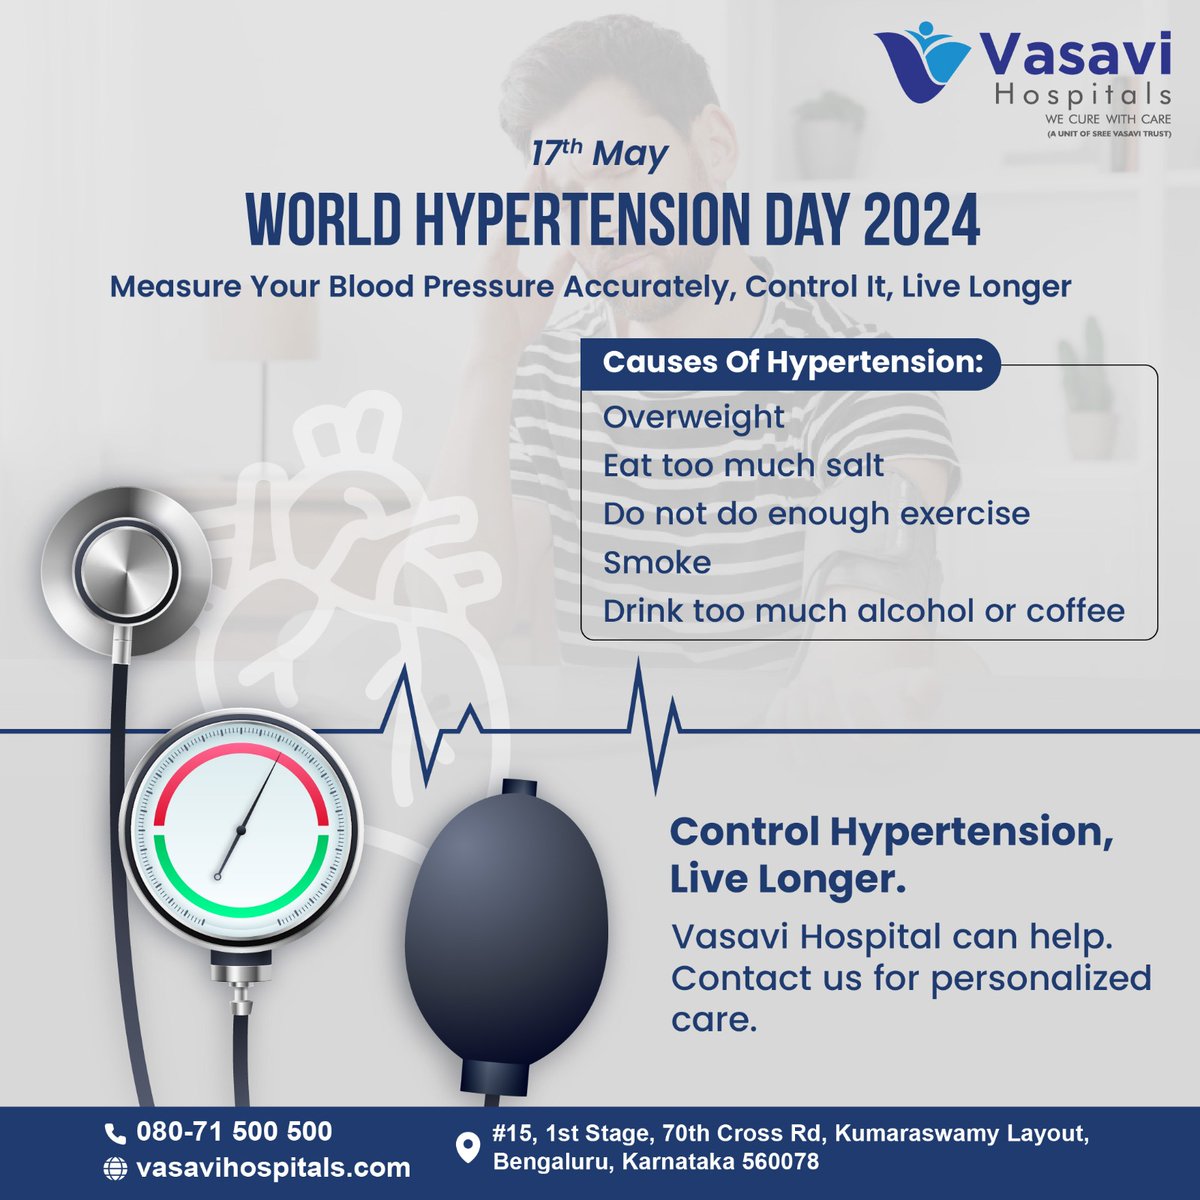 Take charge of your health this World Hypertension Day! 

Did you know? Hypertension, if left unchecked, can lead to serious health complications. 

Stay informed, stay healthy, and remember: control your blood pressure, control your future. 

#WorldHypertensionDay #HeartHealth